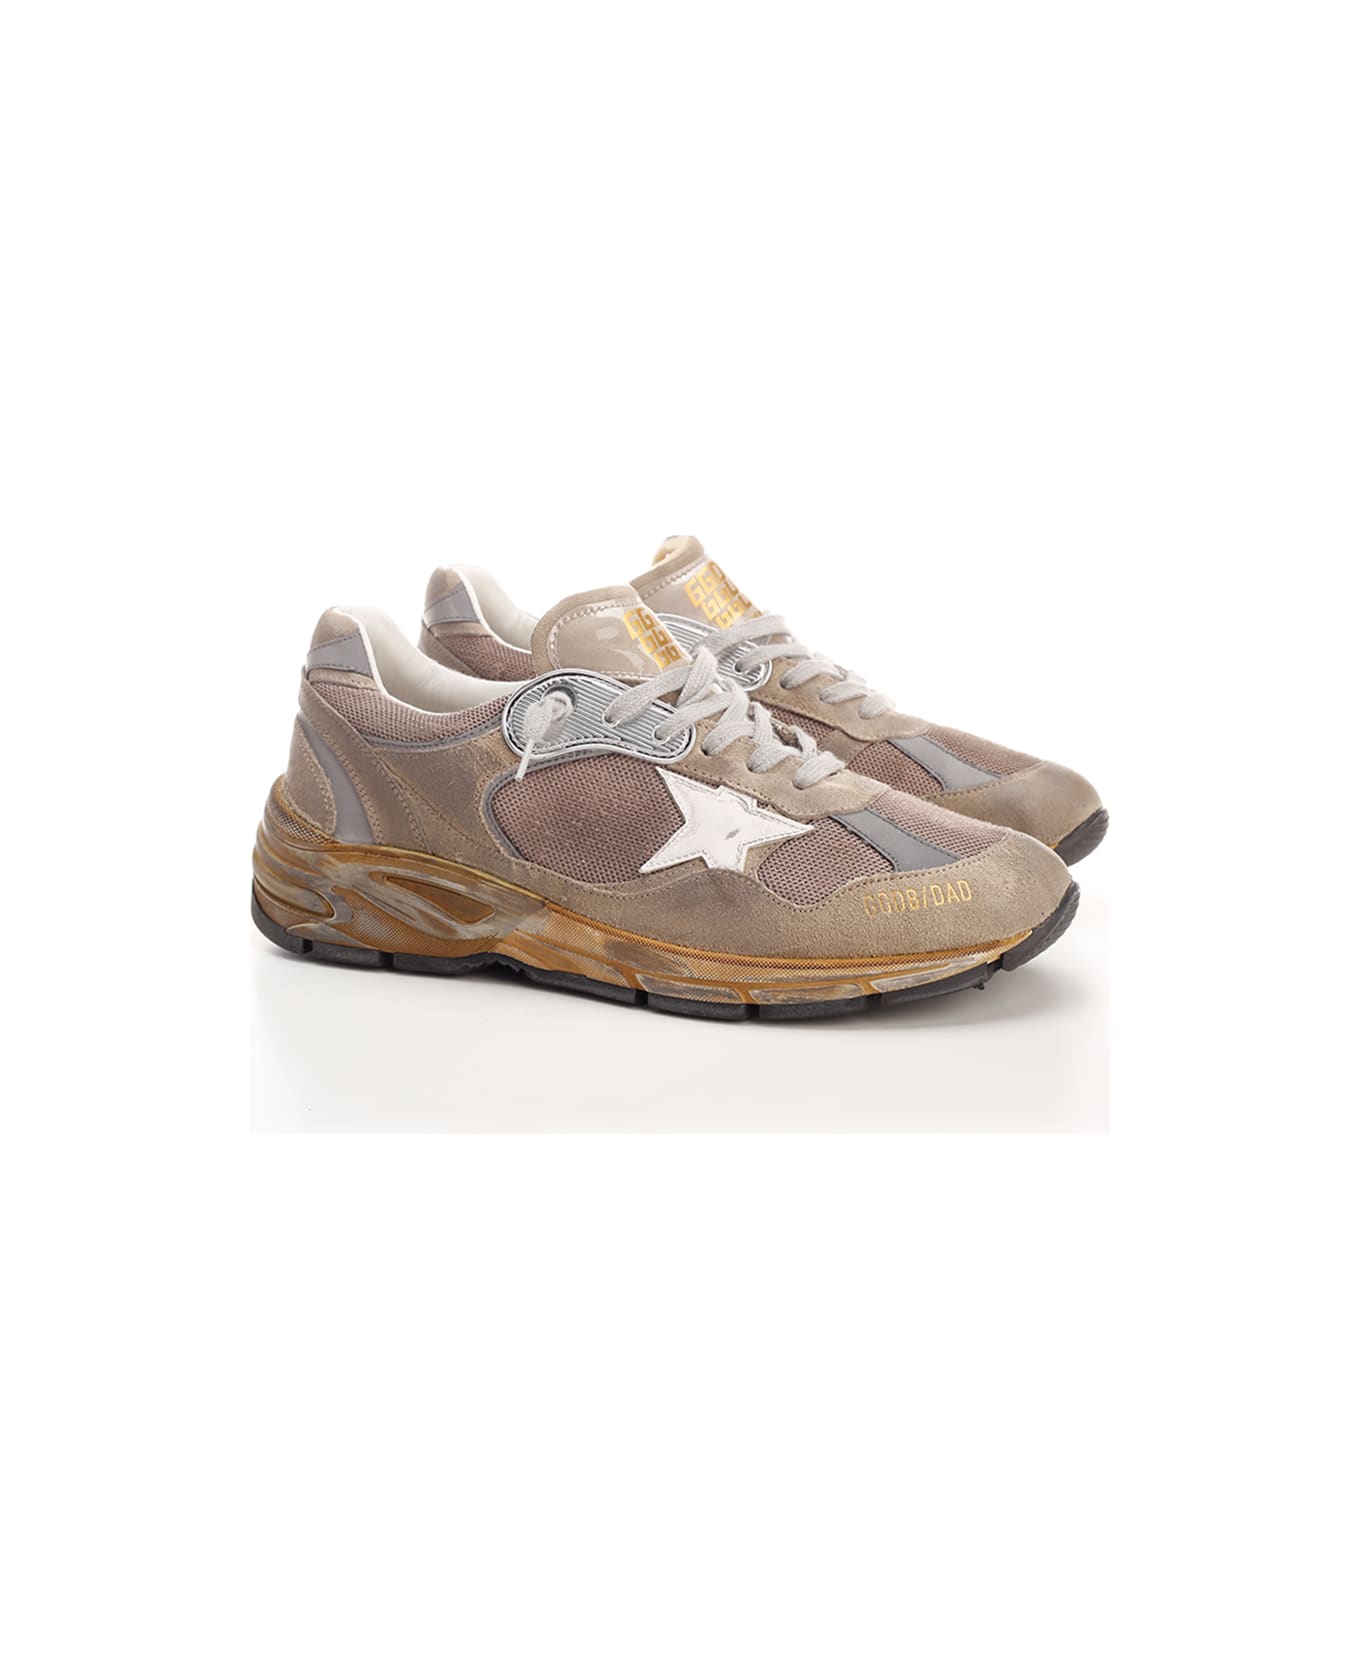 Golden Goose Running Dad Sneaker - Taupe/silver/white